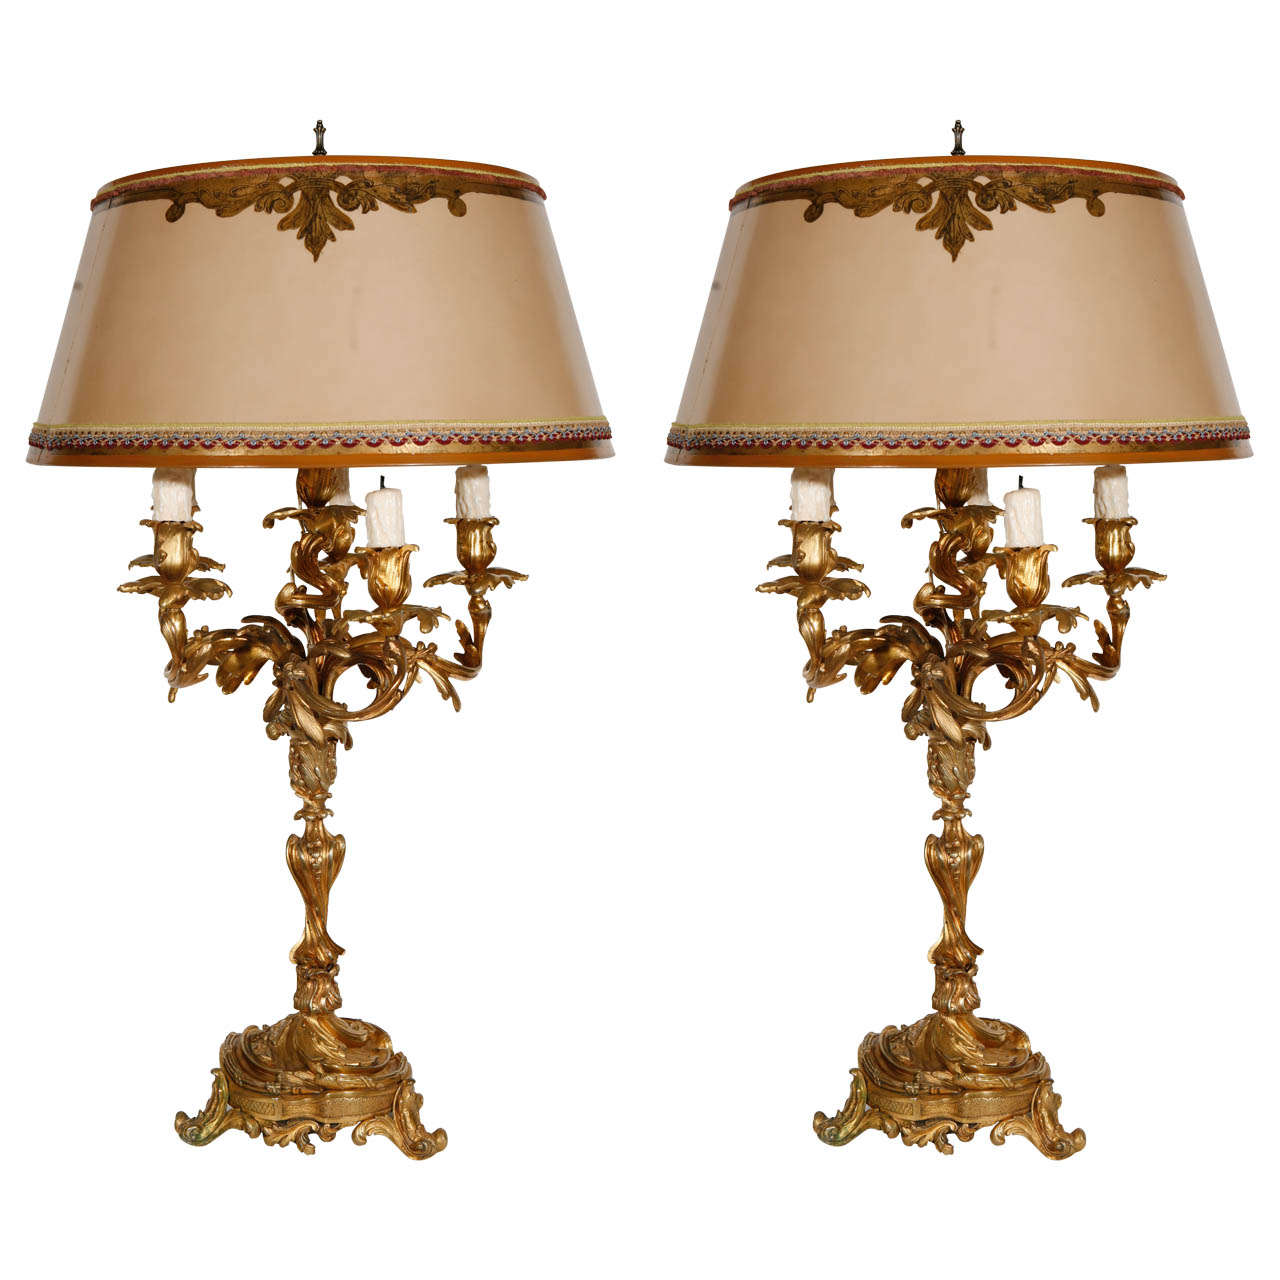 Pair of 19th Century French Dore Bronze Candelabra Lamps